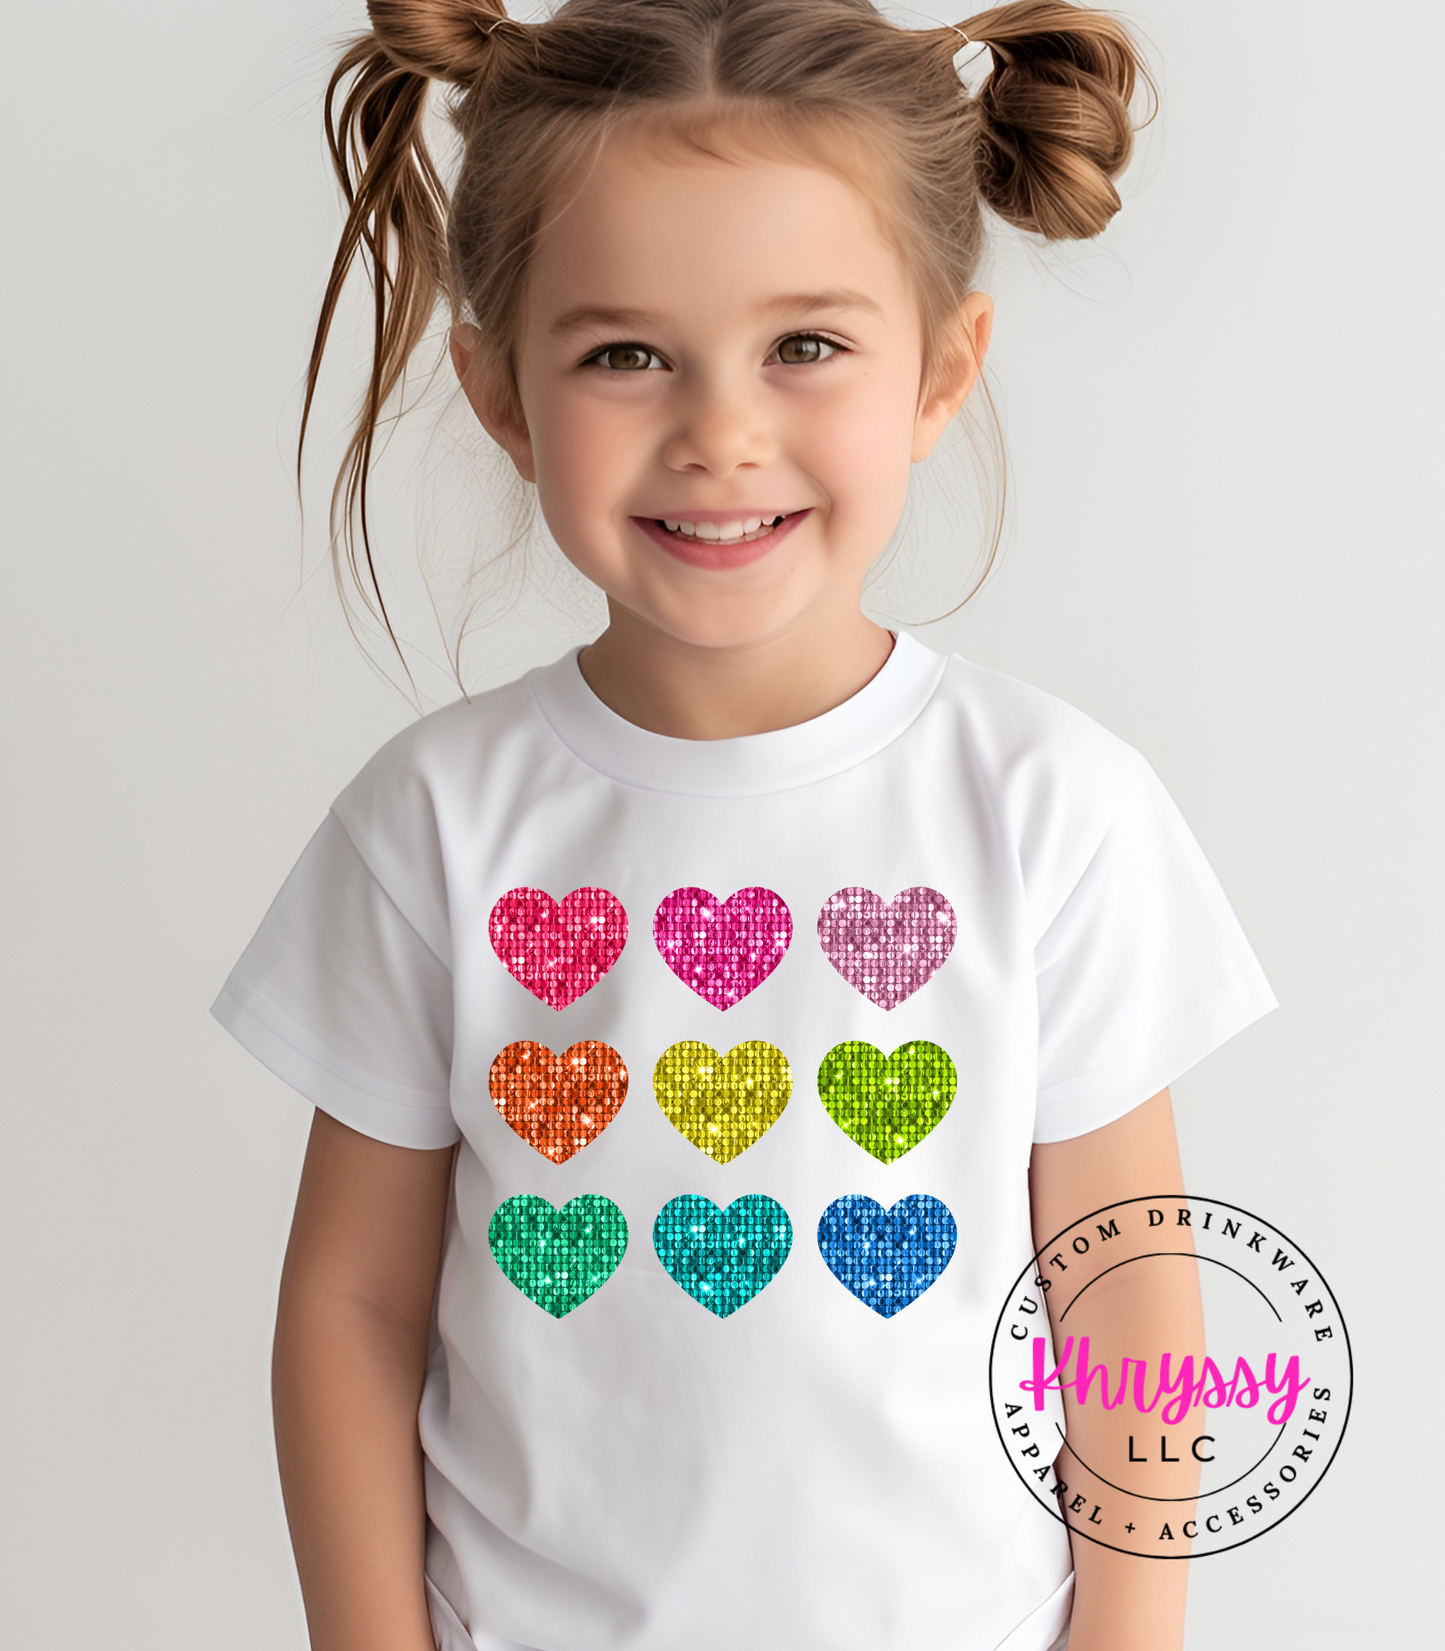 Sparkle with Love: Faux Glitter Heart Shirt!